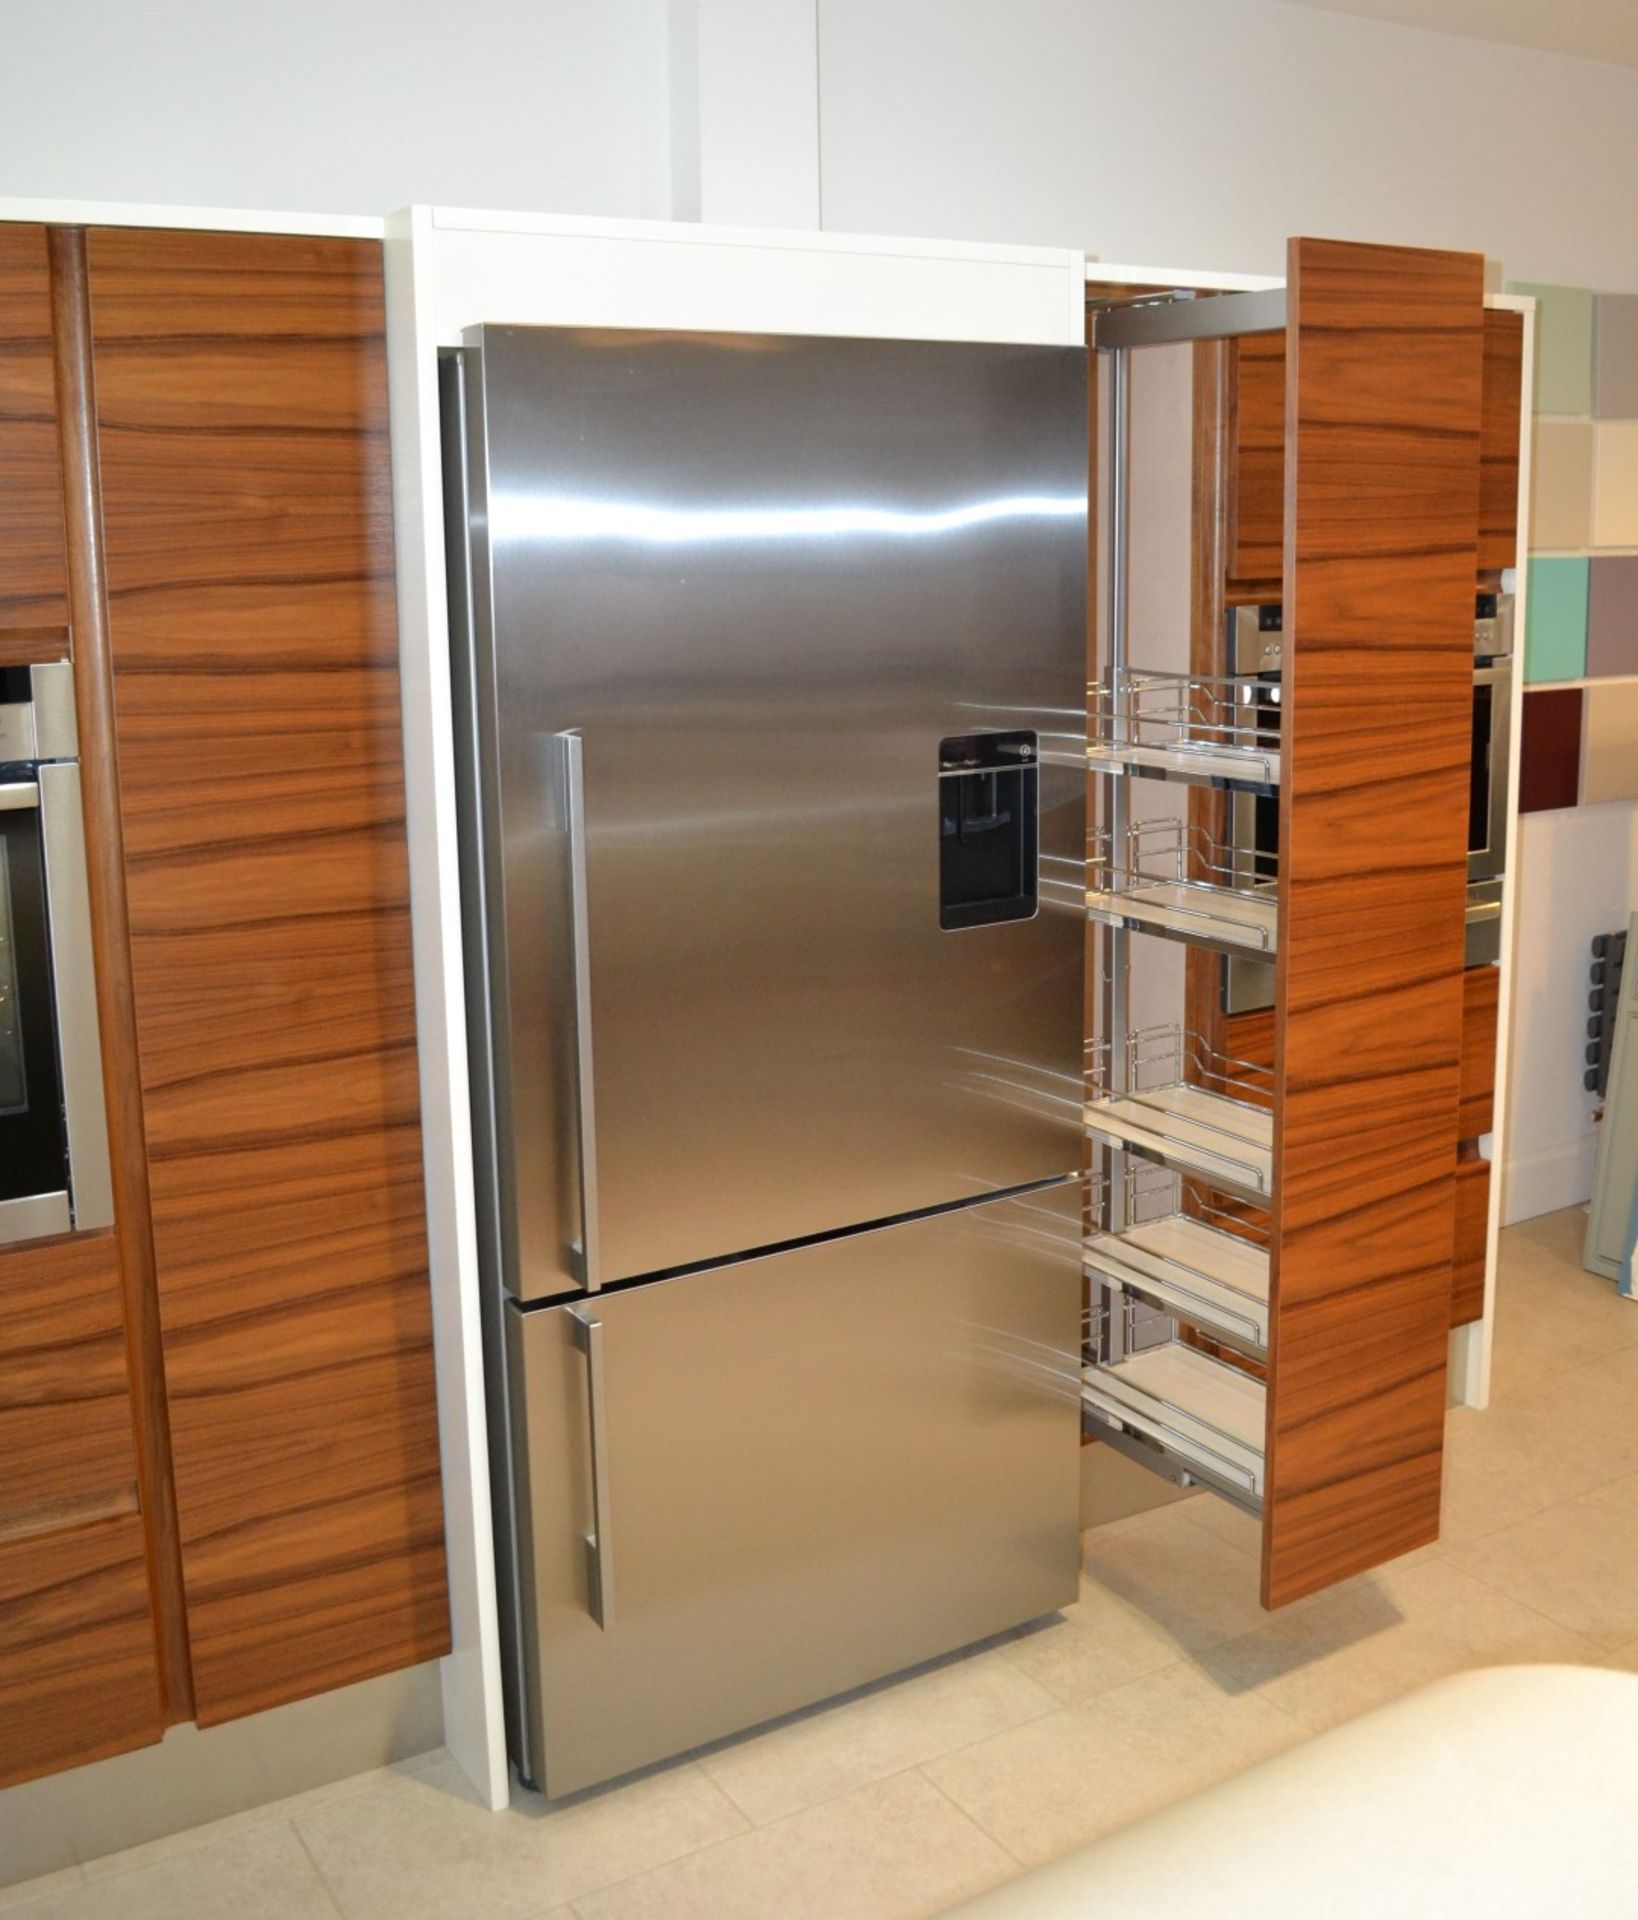 1 x Unused Bespoke Display Kitchen in Perfect Condition - Includes Unused Neff and Fisher & Paykel - Image 41 of 60